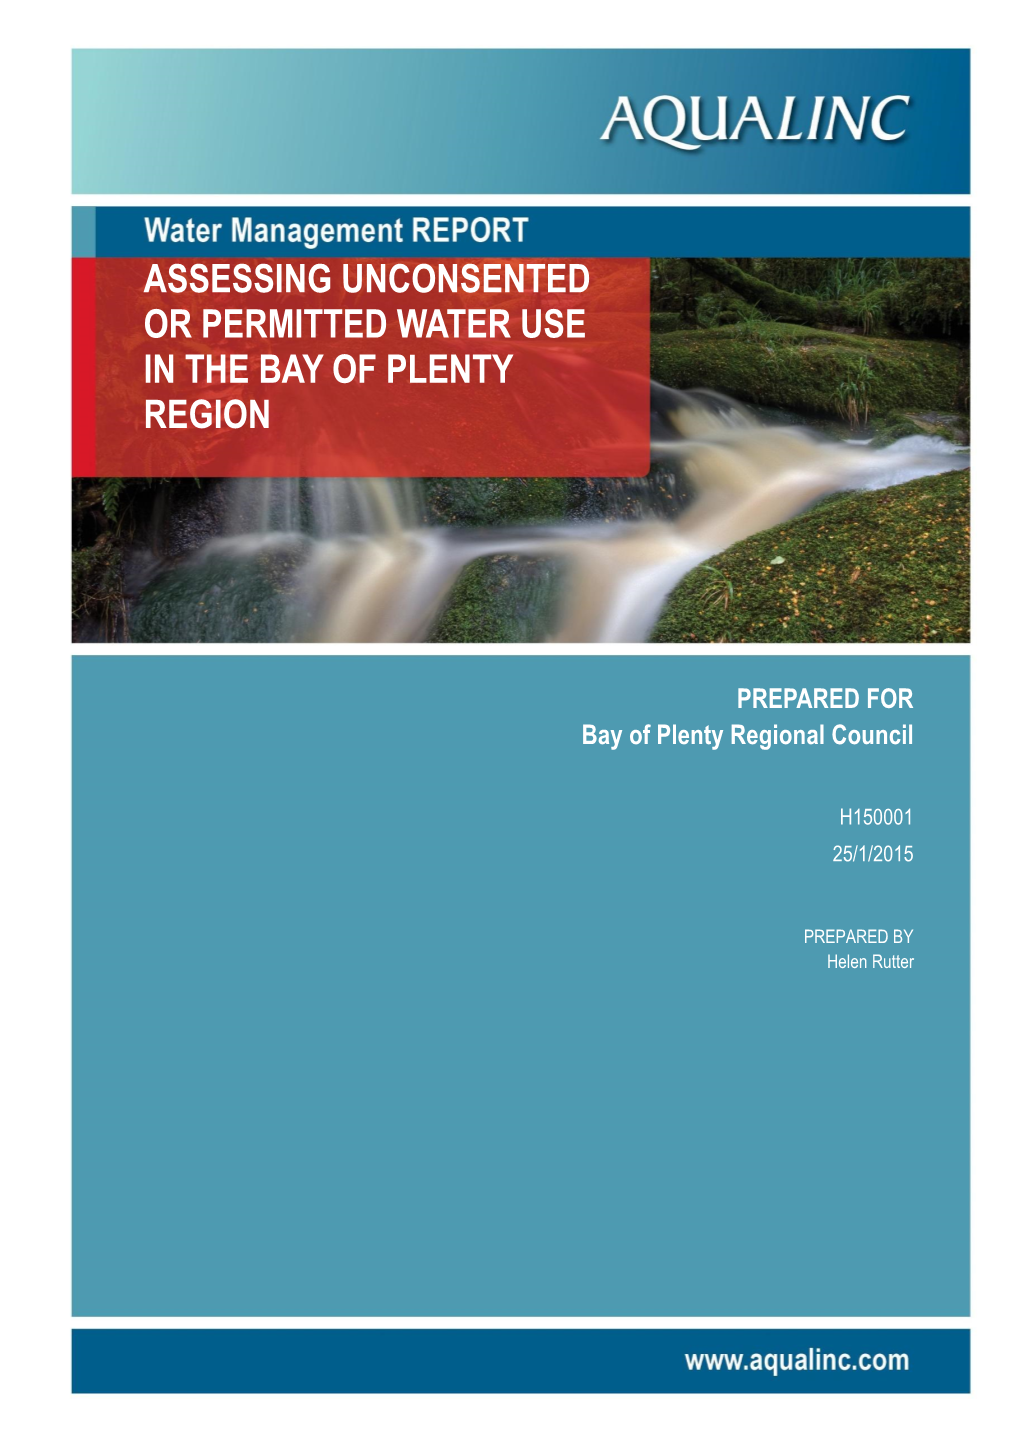 Assessing Unconsented Or Permitted Water Use in the Bay of Plenty Region